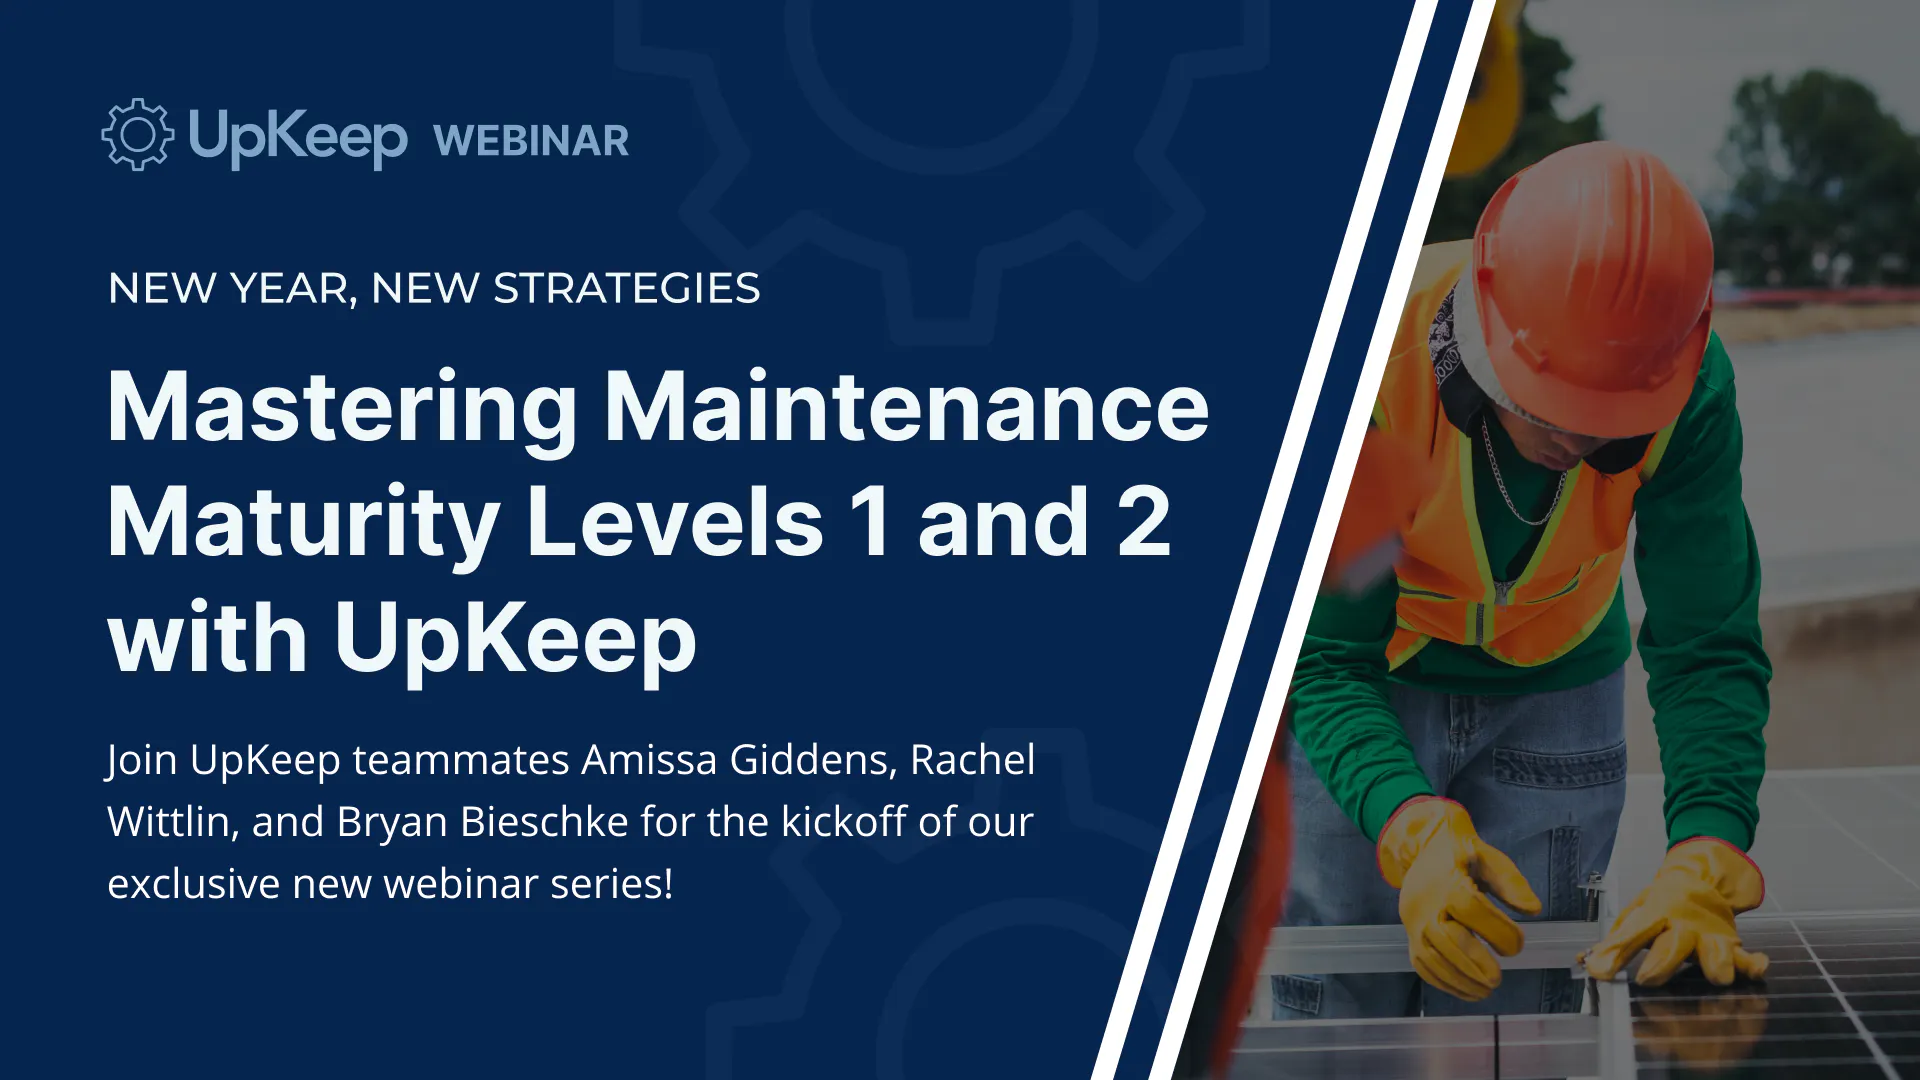 New Year, New Strategies: Mastering Maintenance Maturity Levels 1 and 2 with UpKeep